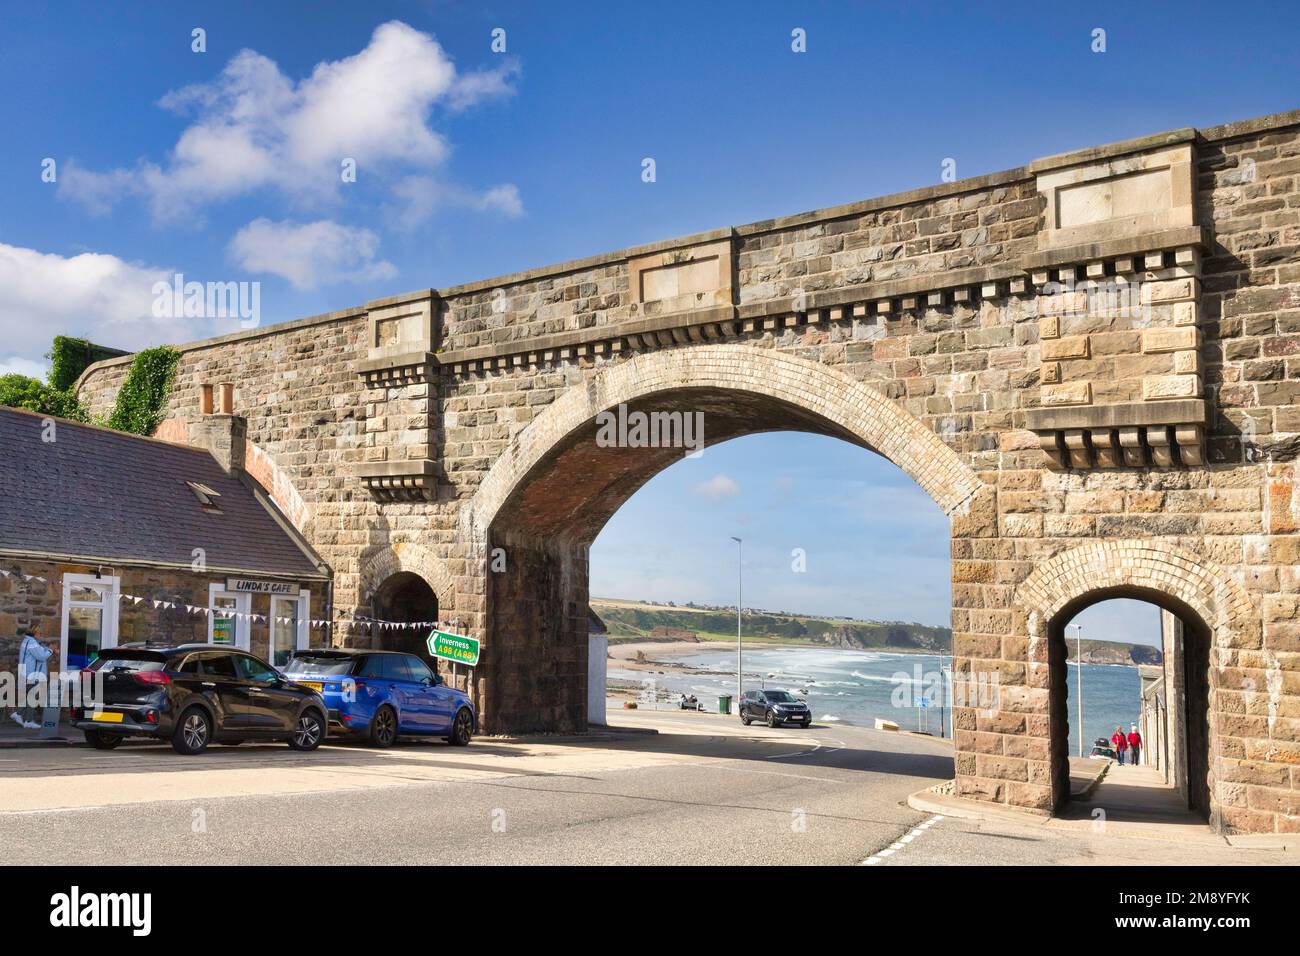 7 September 2022: Cullen, Moray, Scotland - The railway bridge over Seafield Street, with a view through the arch to the beach. Stock Photo